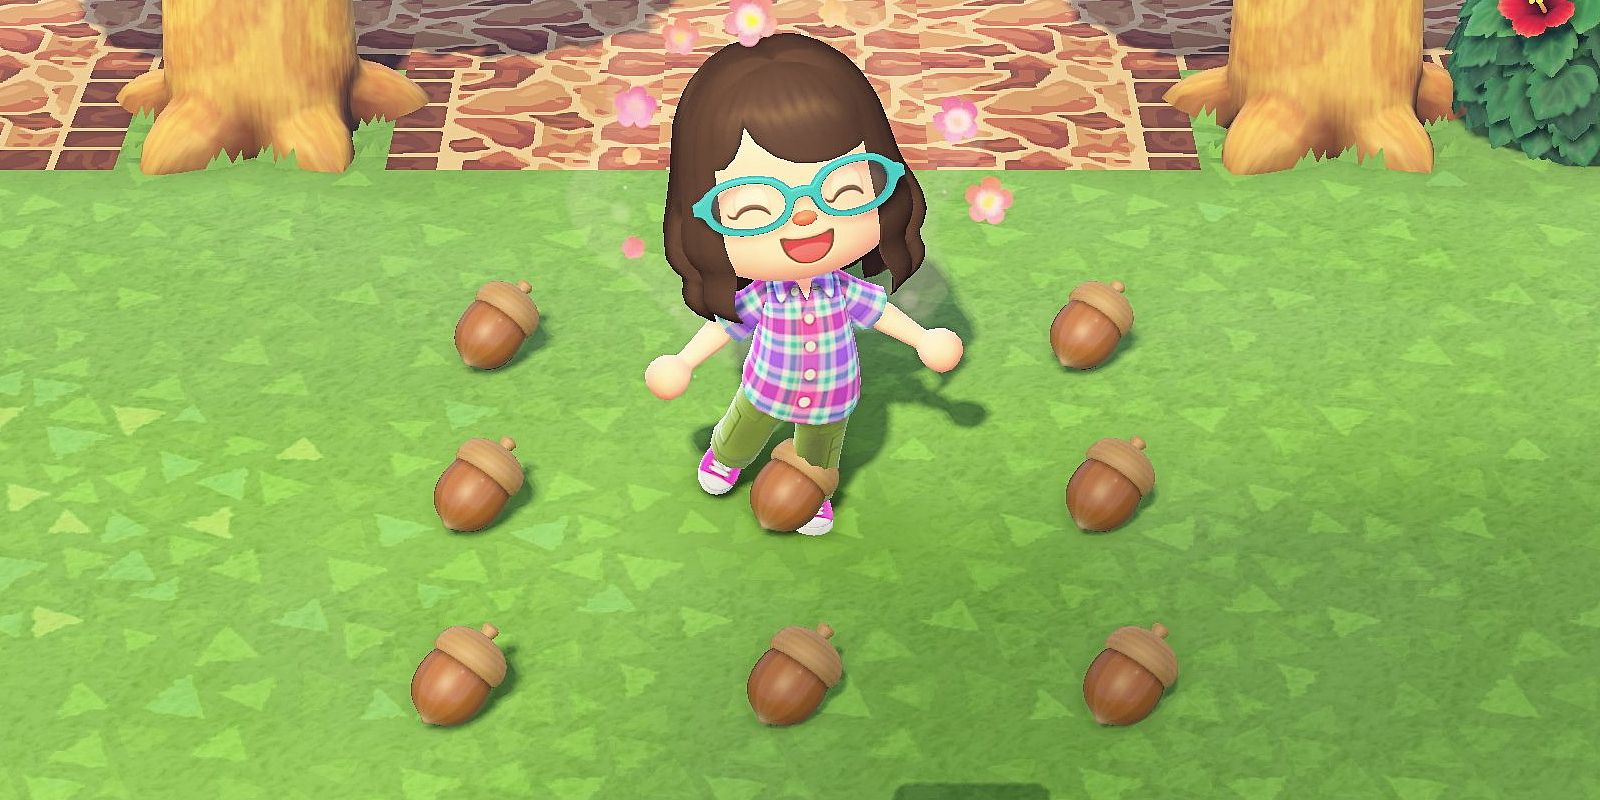 A villager surrounded by acorns in Animal Crossing New Horizons